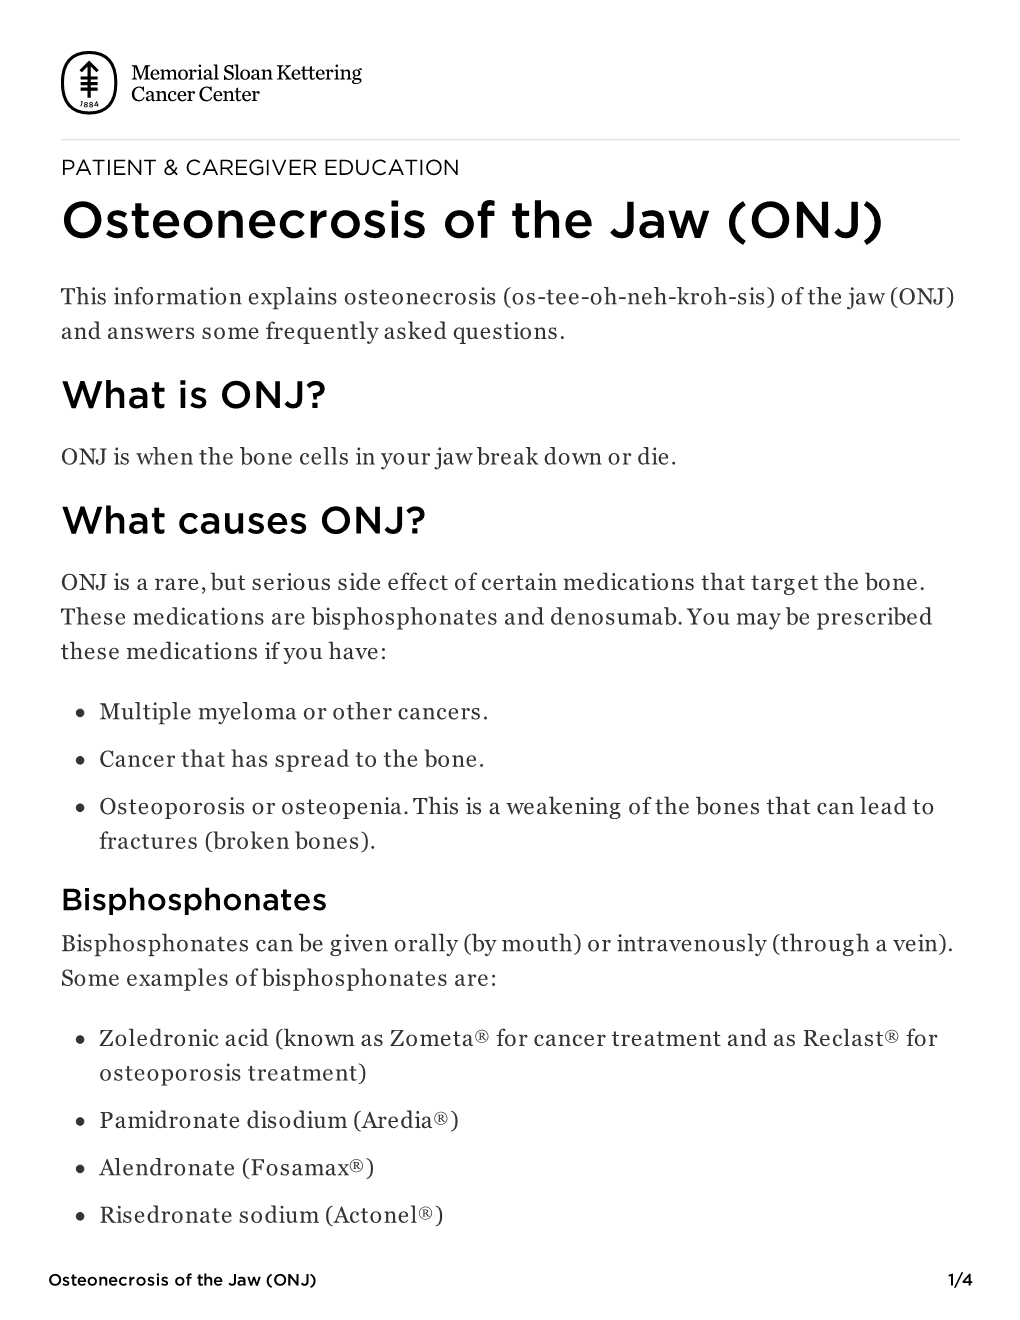 Osteonecrosis of the Jaw (ONJ) | Memorial Sloan Kettering Cancer